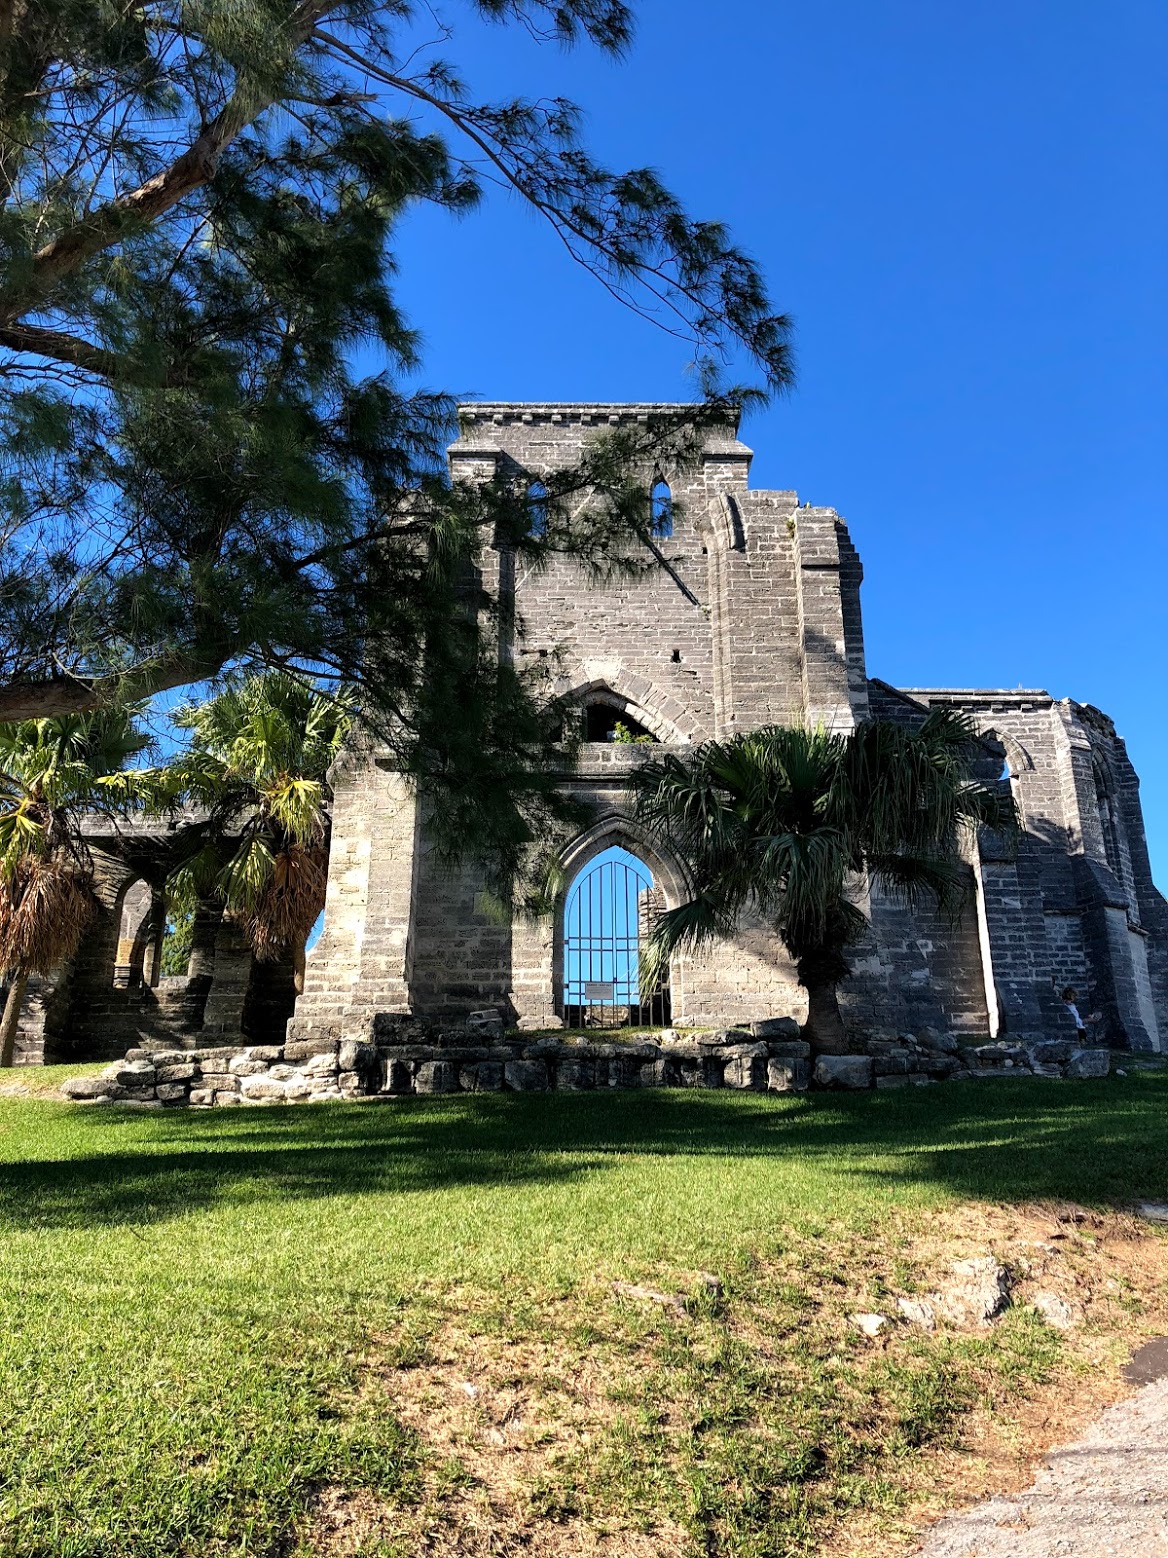 unfinished church, st. georges's island, bermuda, the-alyst.com